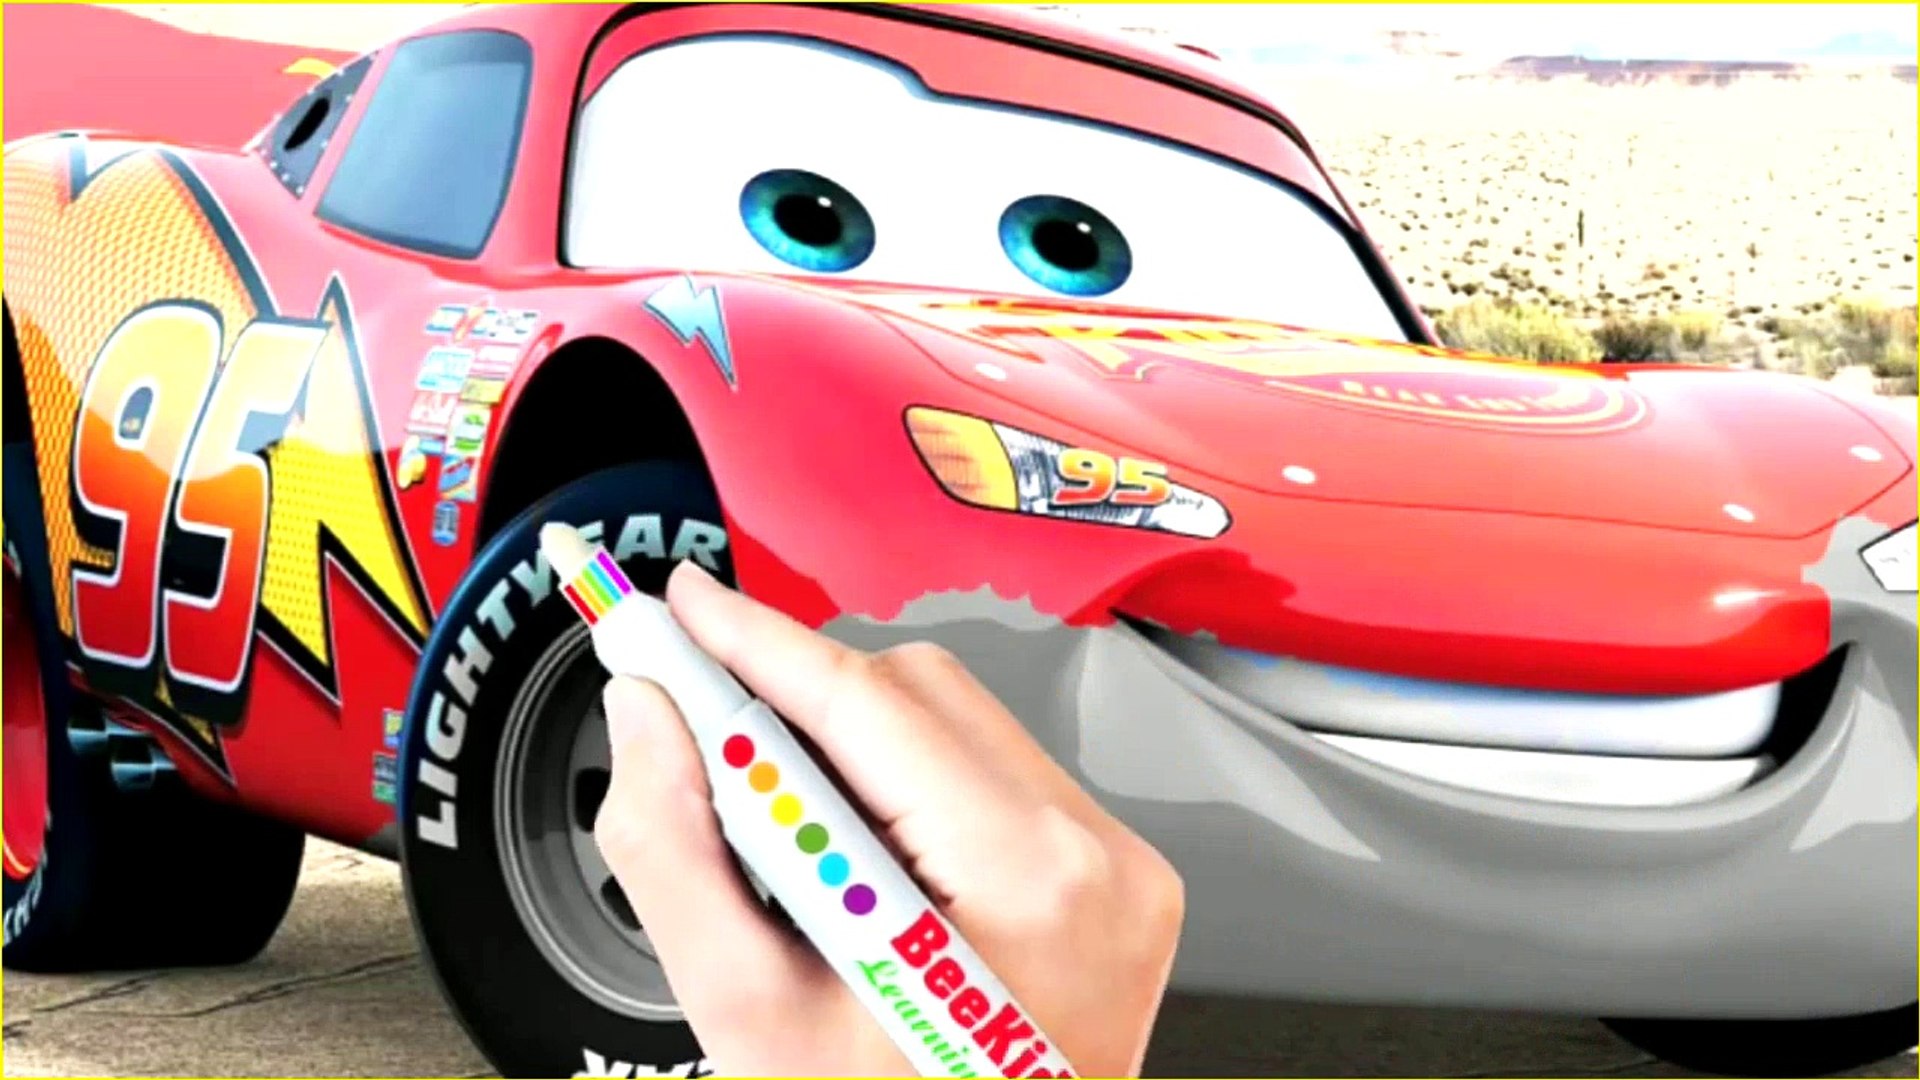 Cars 3 Lightning Mcqueen Memorable Moments Coloring Book Pages Video For  Children - Video Dailymotion